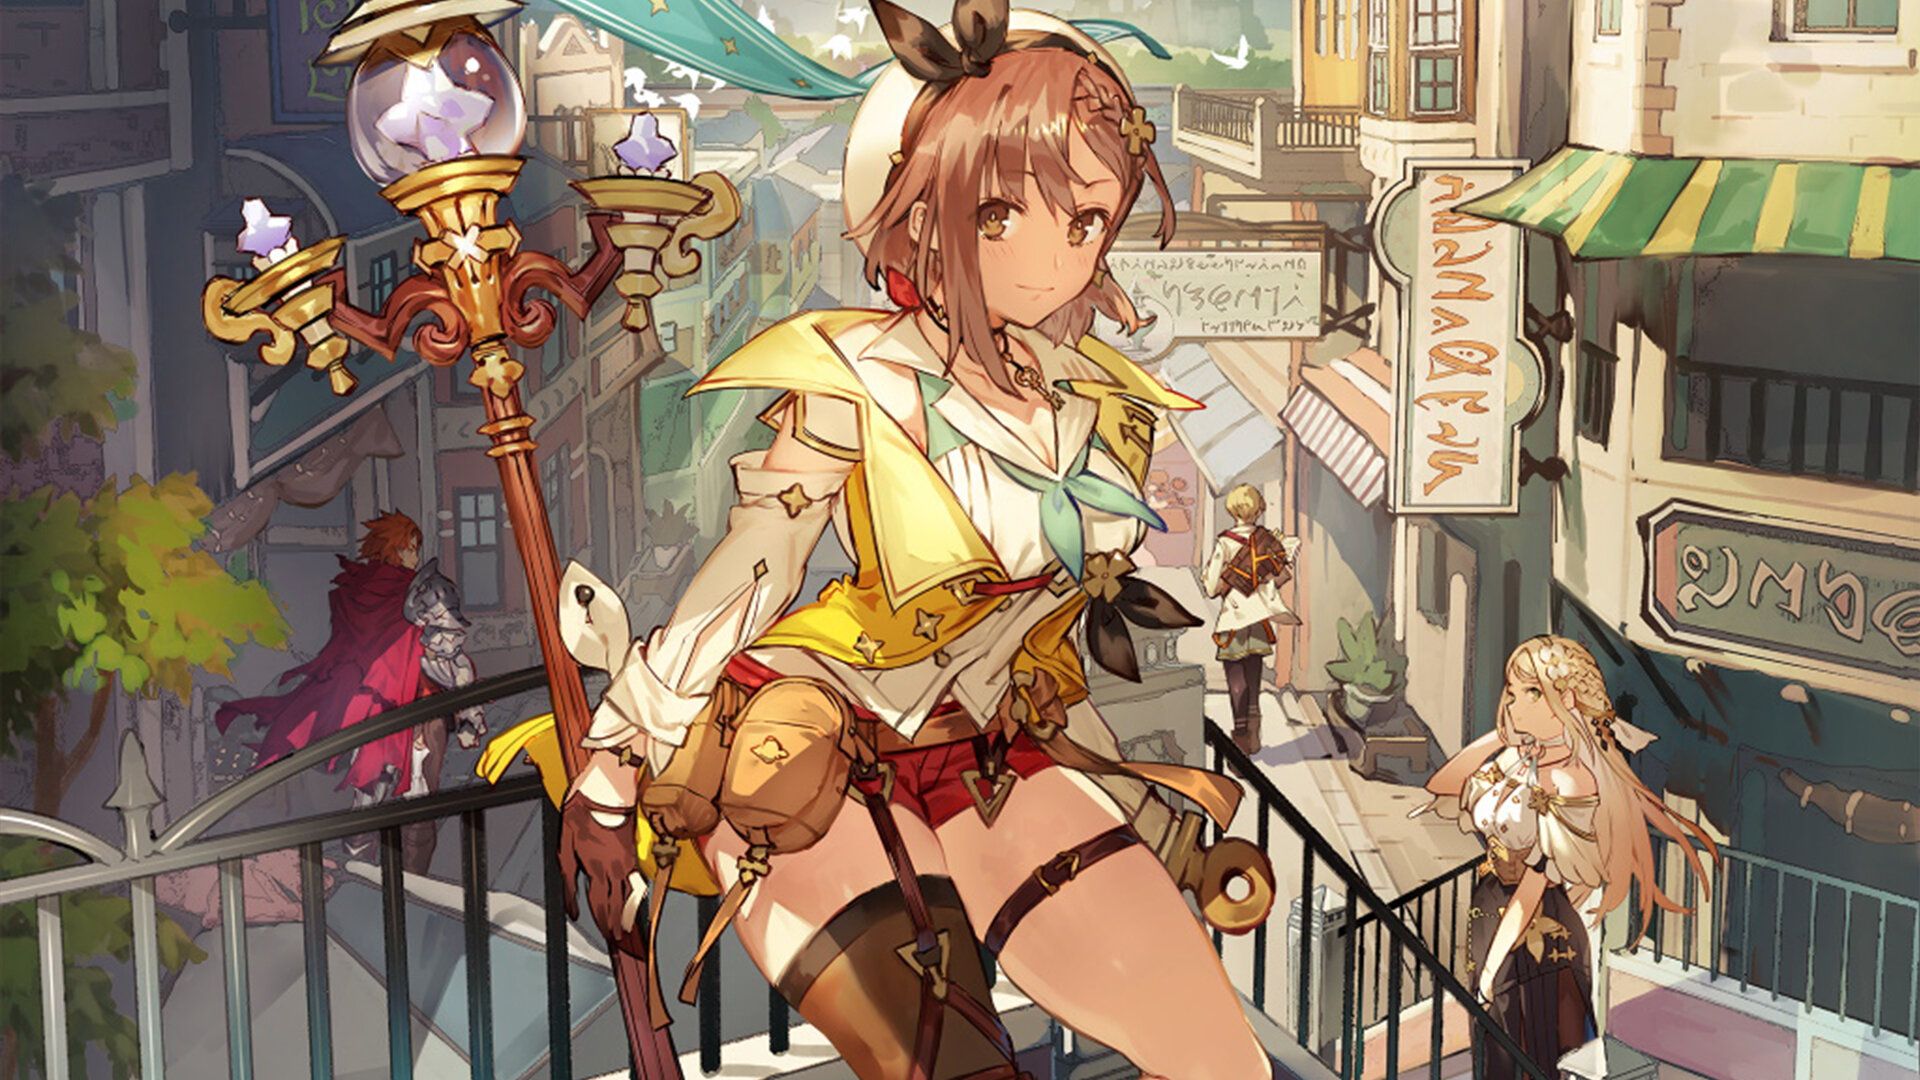 Atelier Ryza 2: Lost Legends & the Secret Fairy is coming out this January